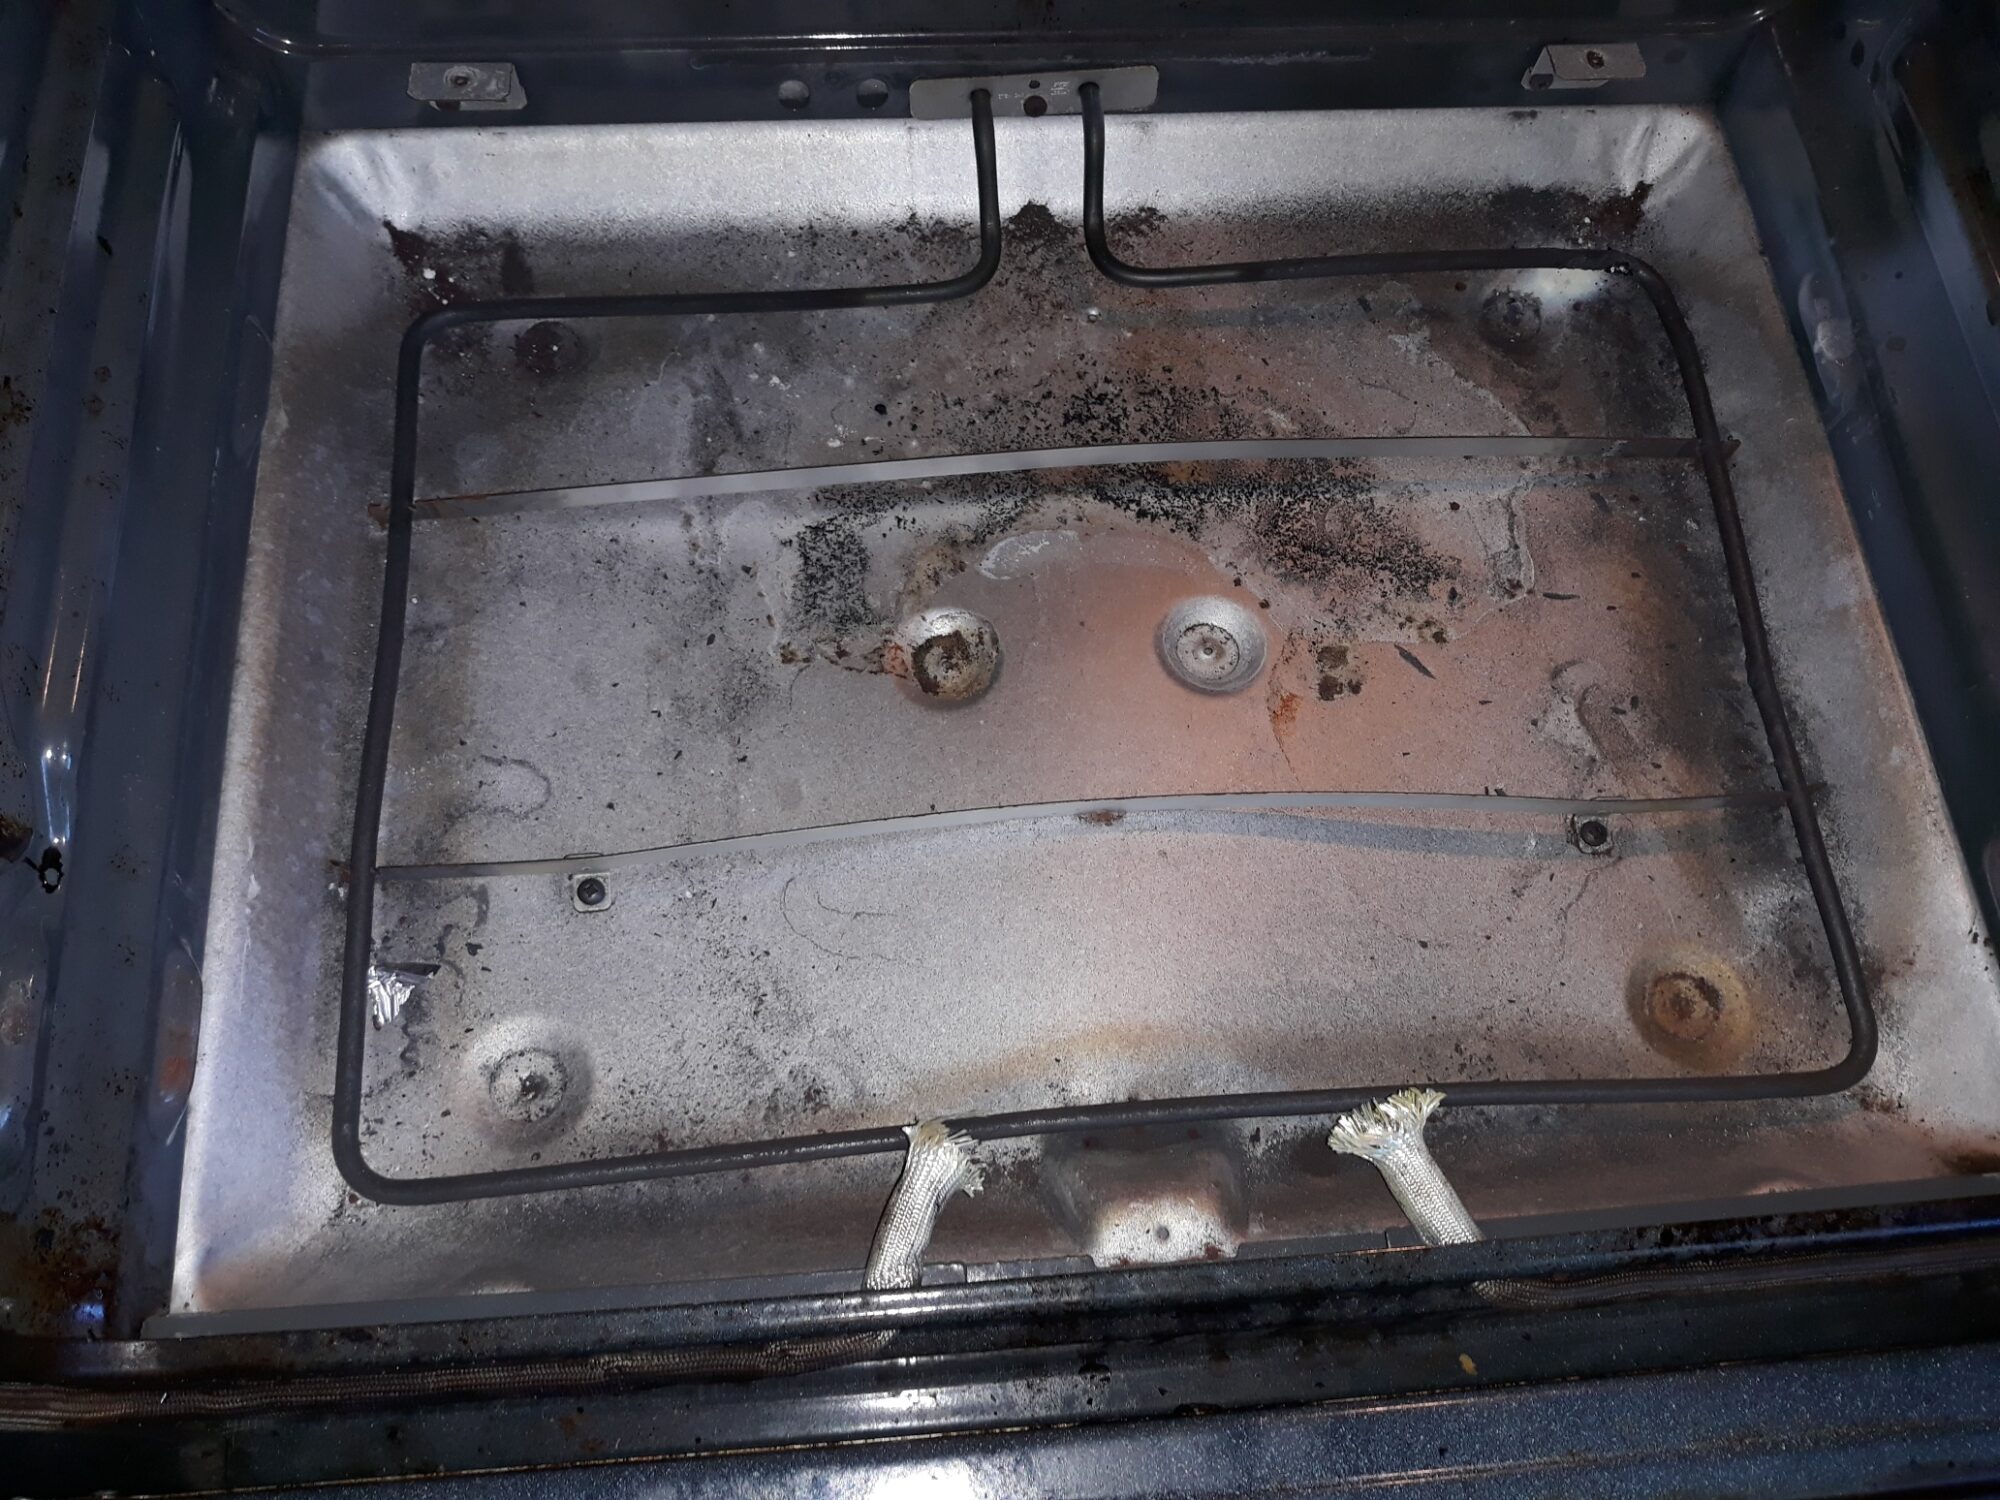 appliance repair oven repair repair require replacement of the shorted and burned out bake element coil assembly with a new part chain o lakes road grand island fl 32735